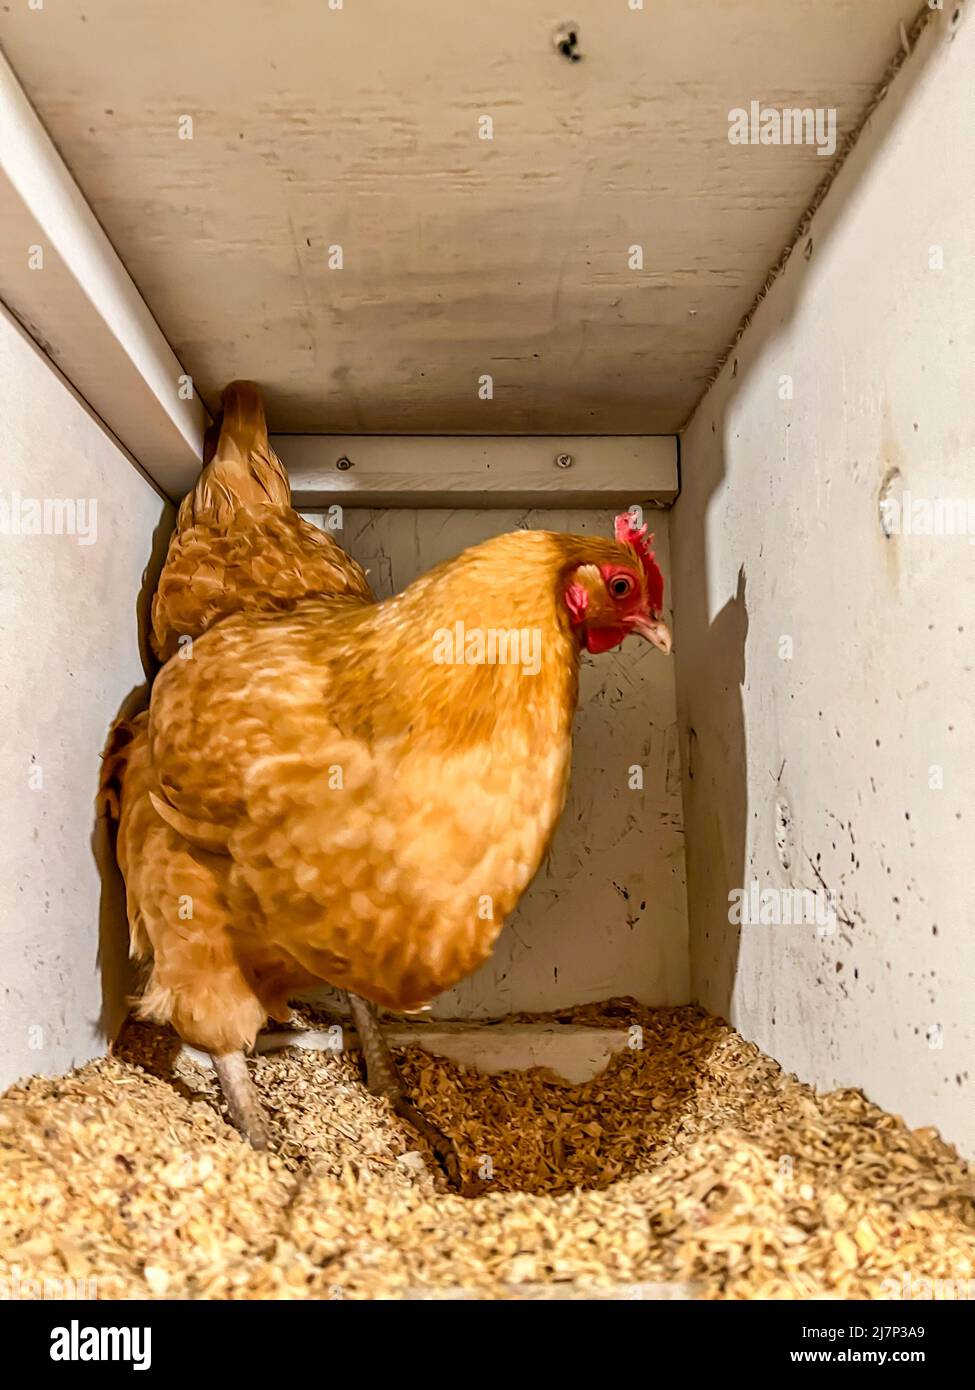 Layer chicken in a cage free coop for laying eggs.  Stock Photo